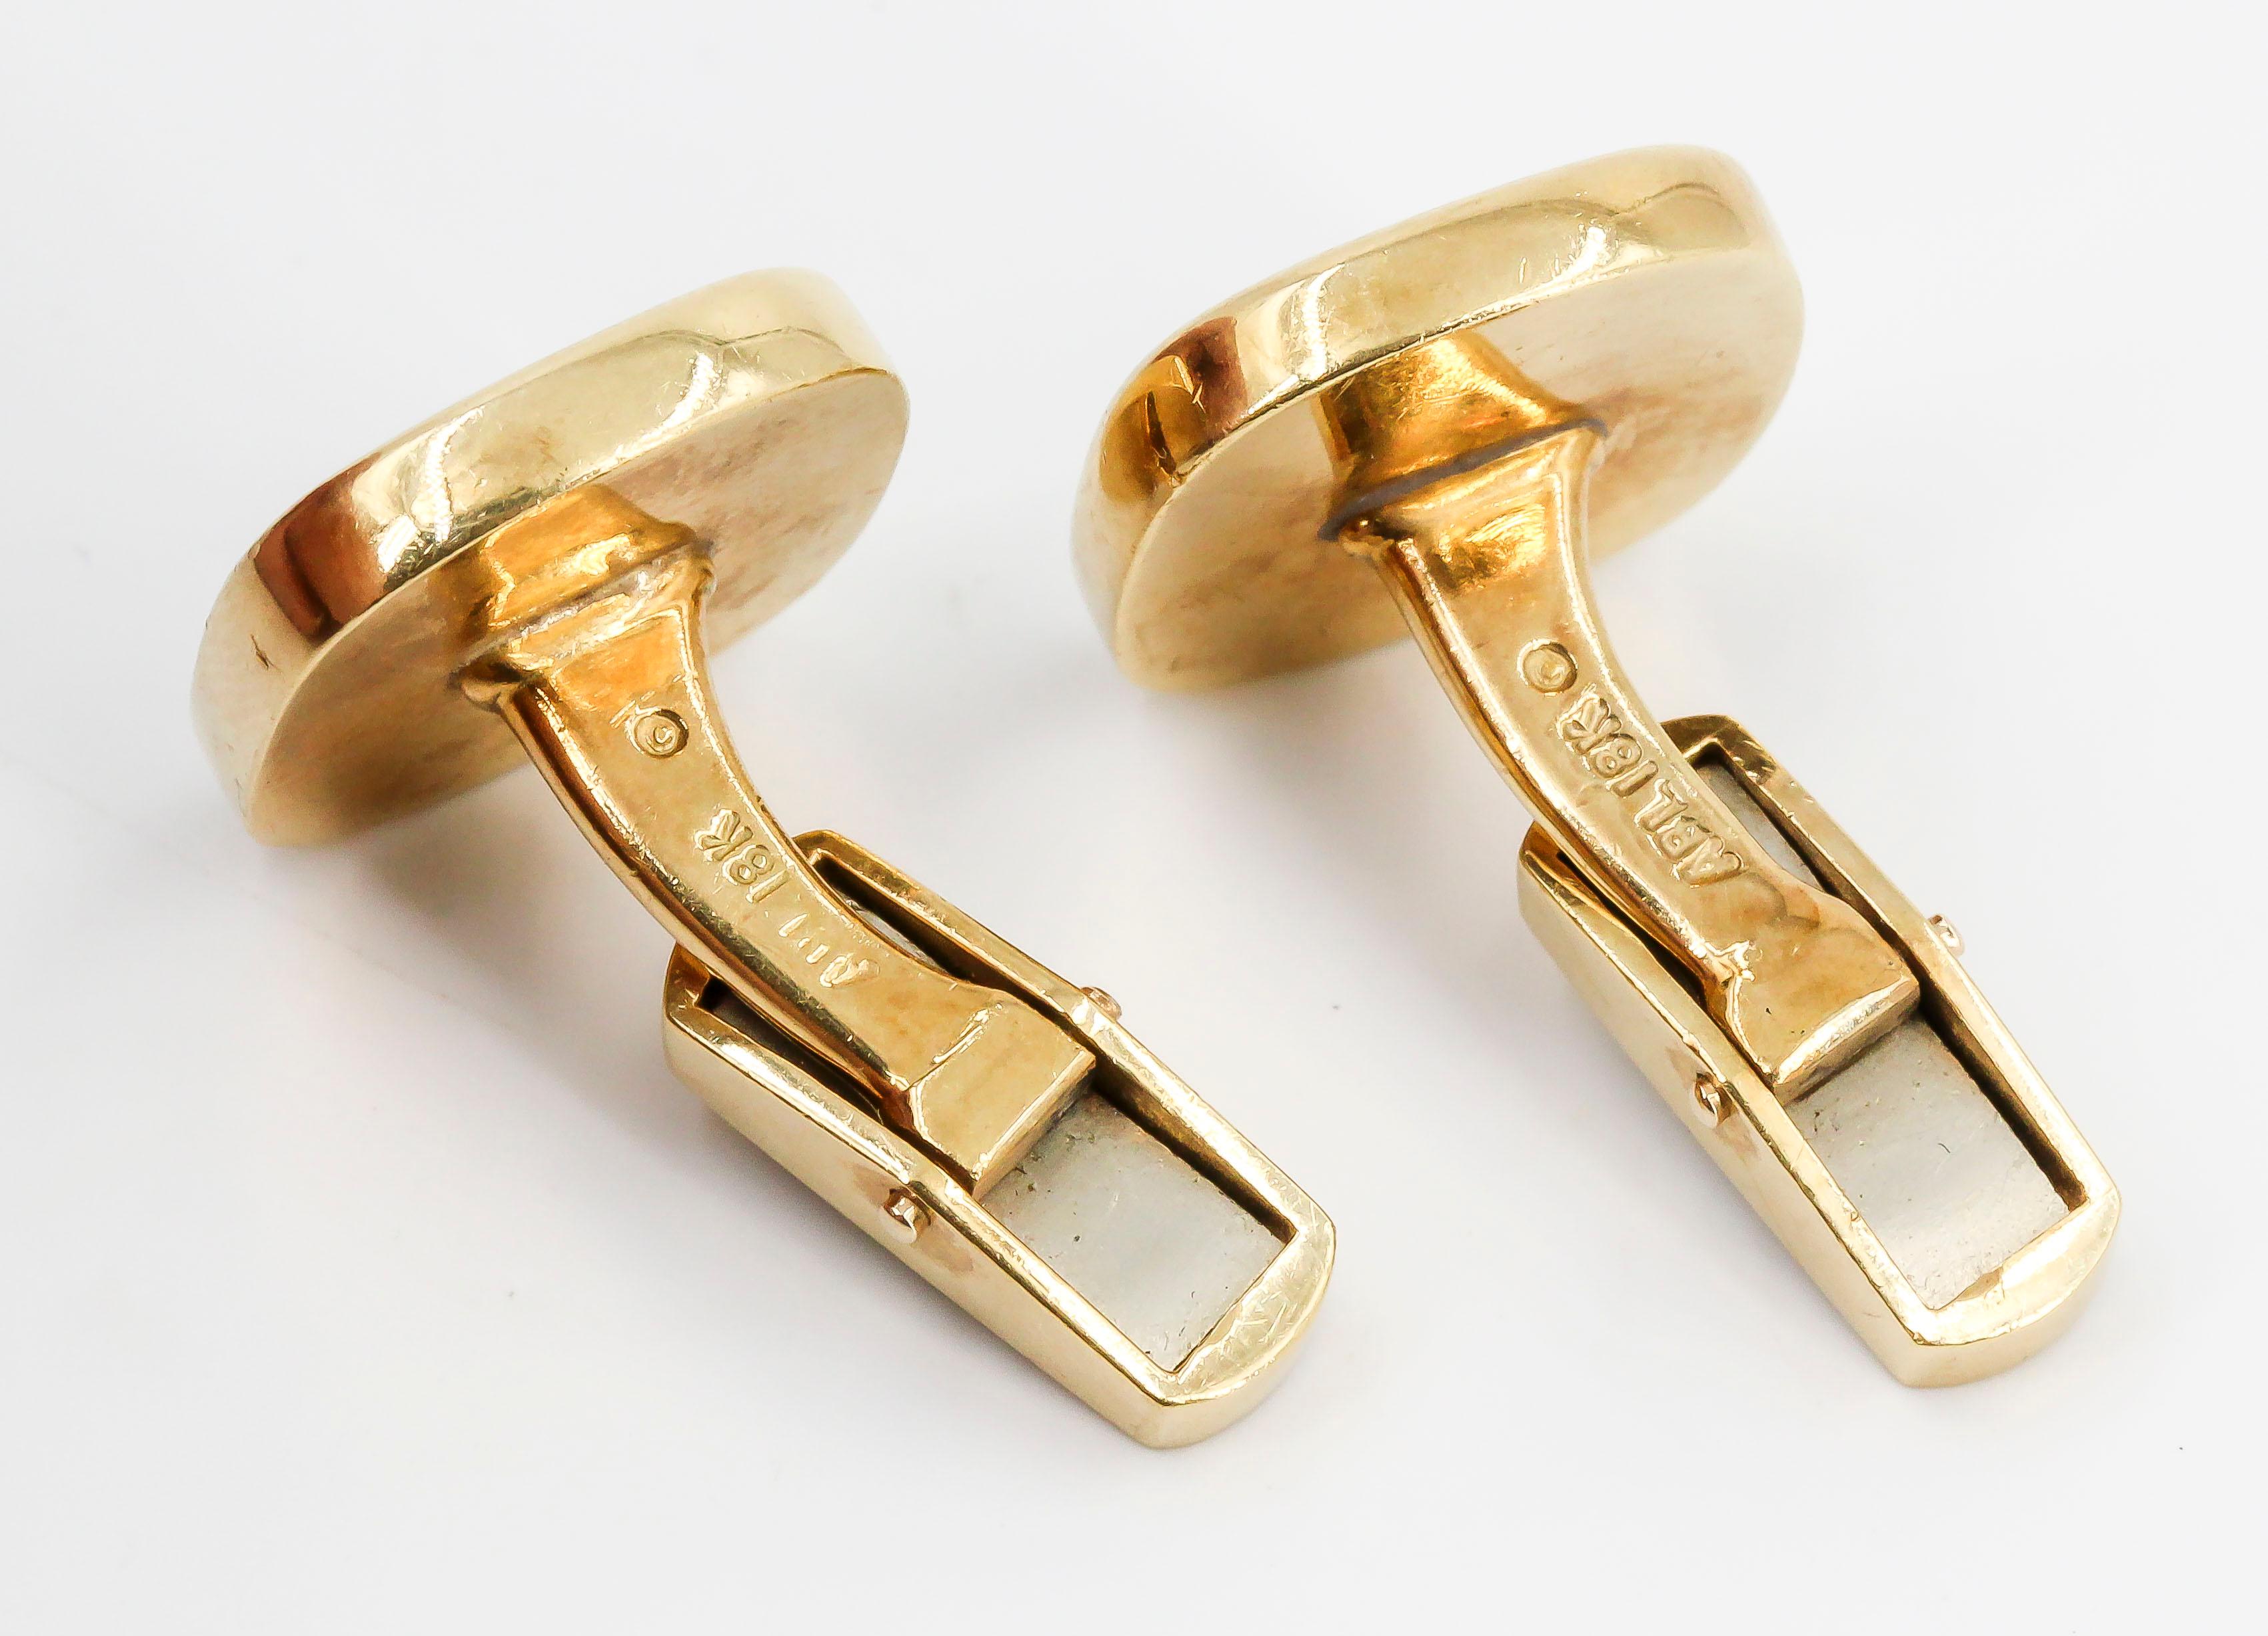 Inlaid Mother-of-pearl, Onyx and 18 Karat Gold Cufflinks 2